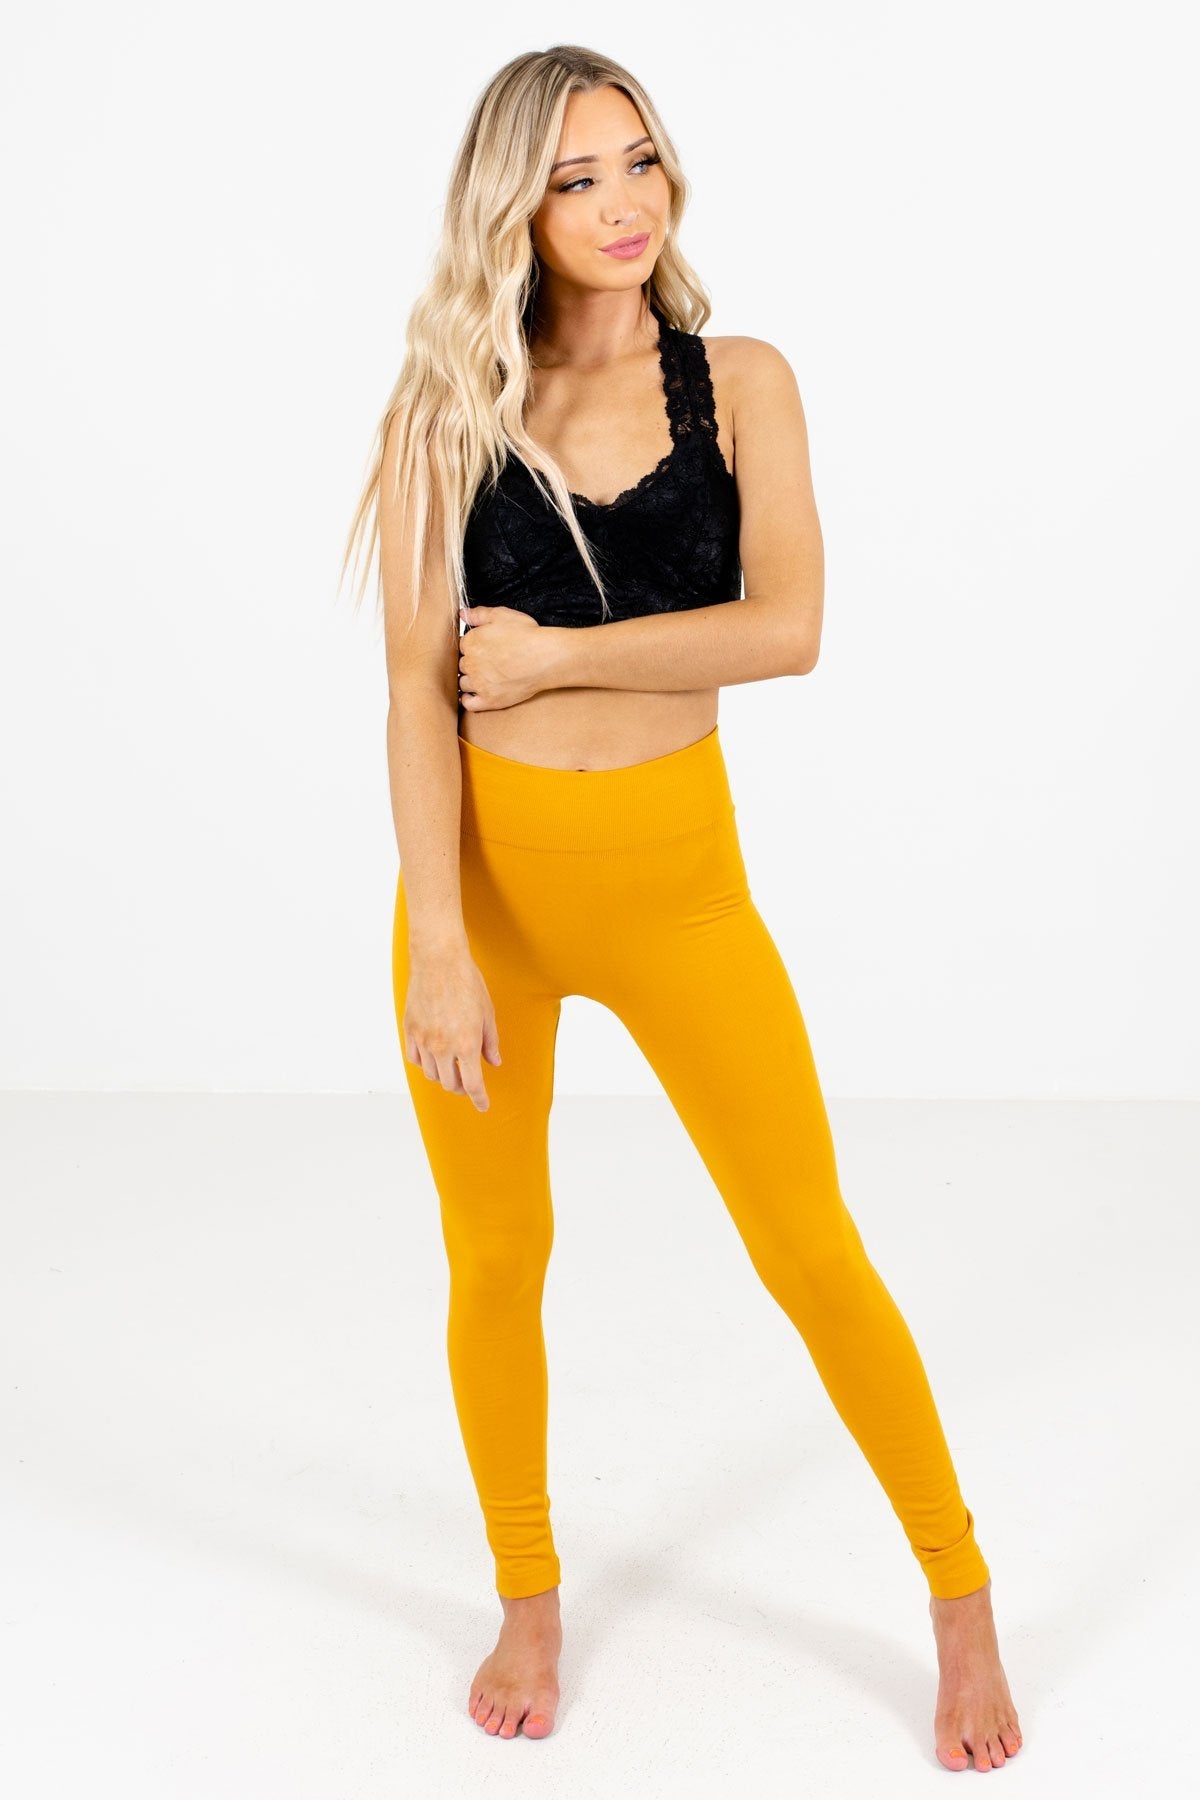 Mustard Yellow Cute and Comfortable Boutique Leggings for Women